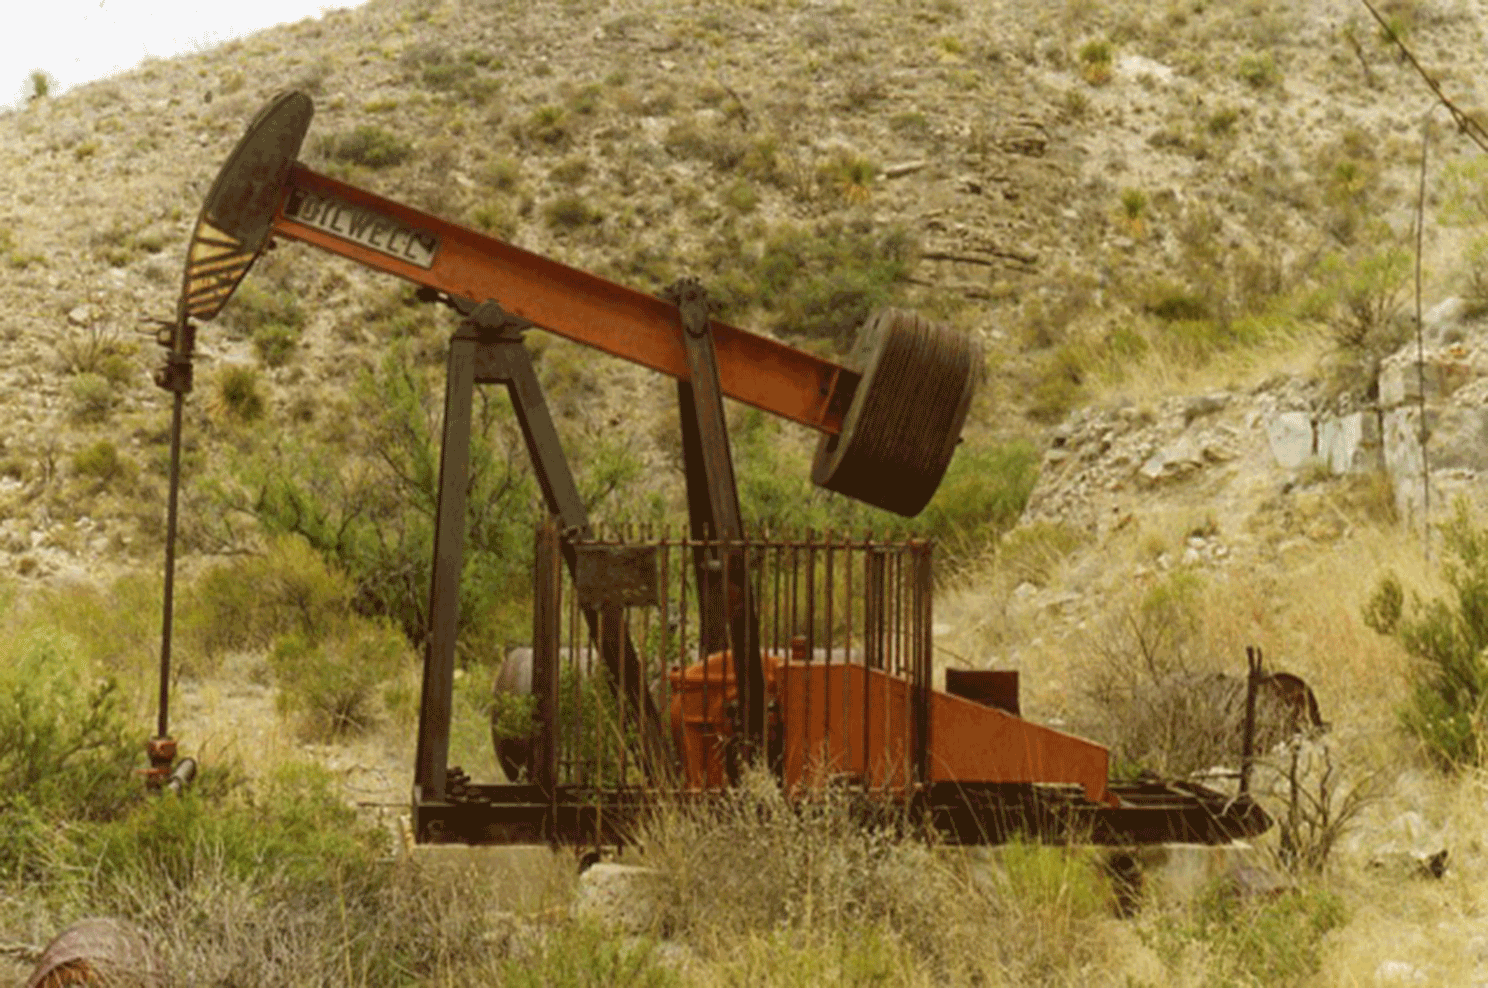 Photo of an abandoned pump jack well.